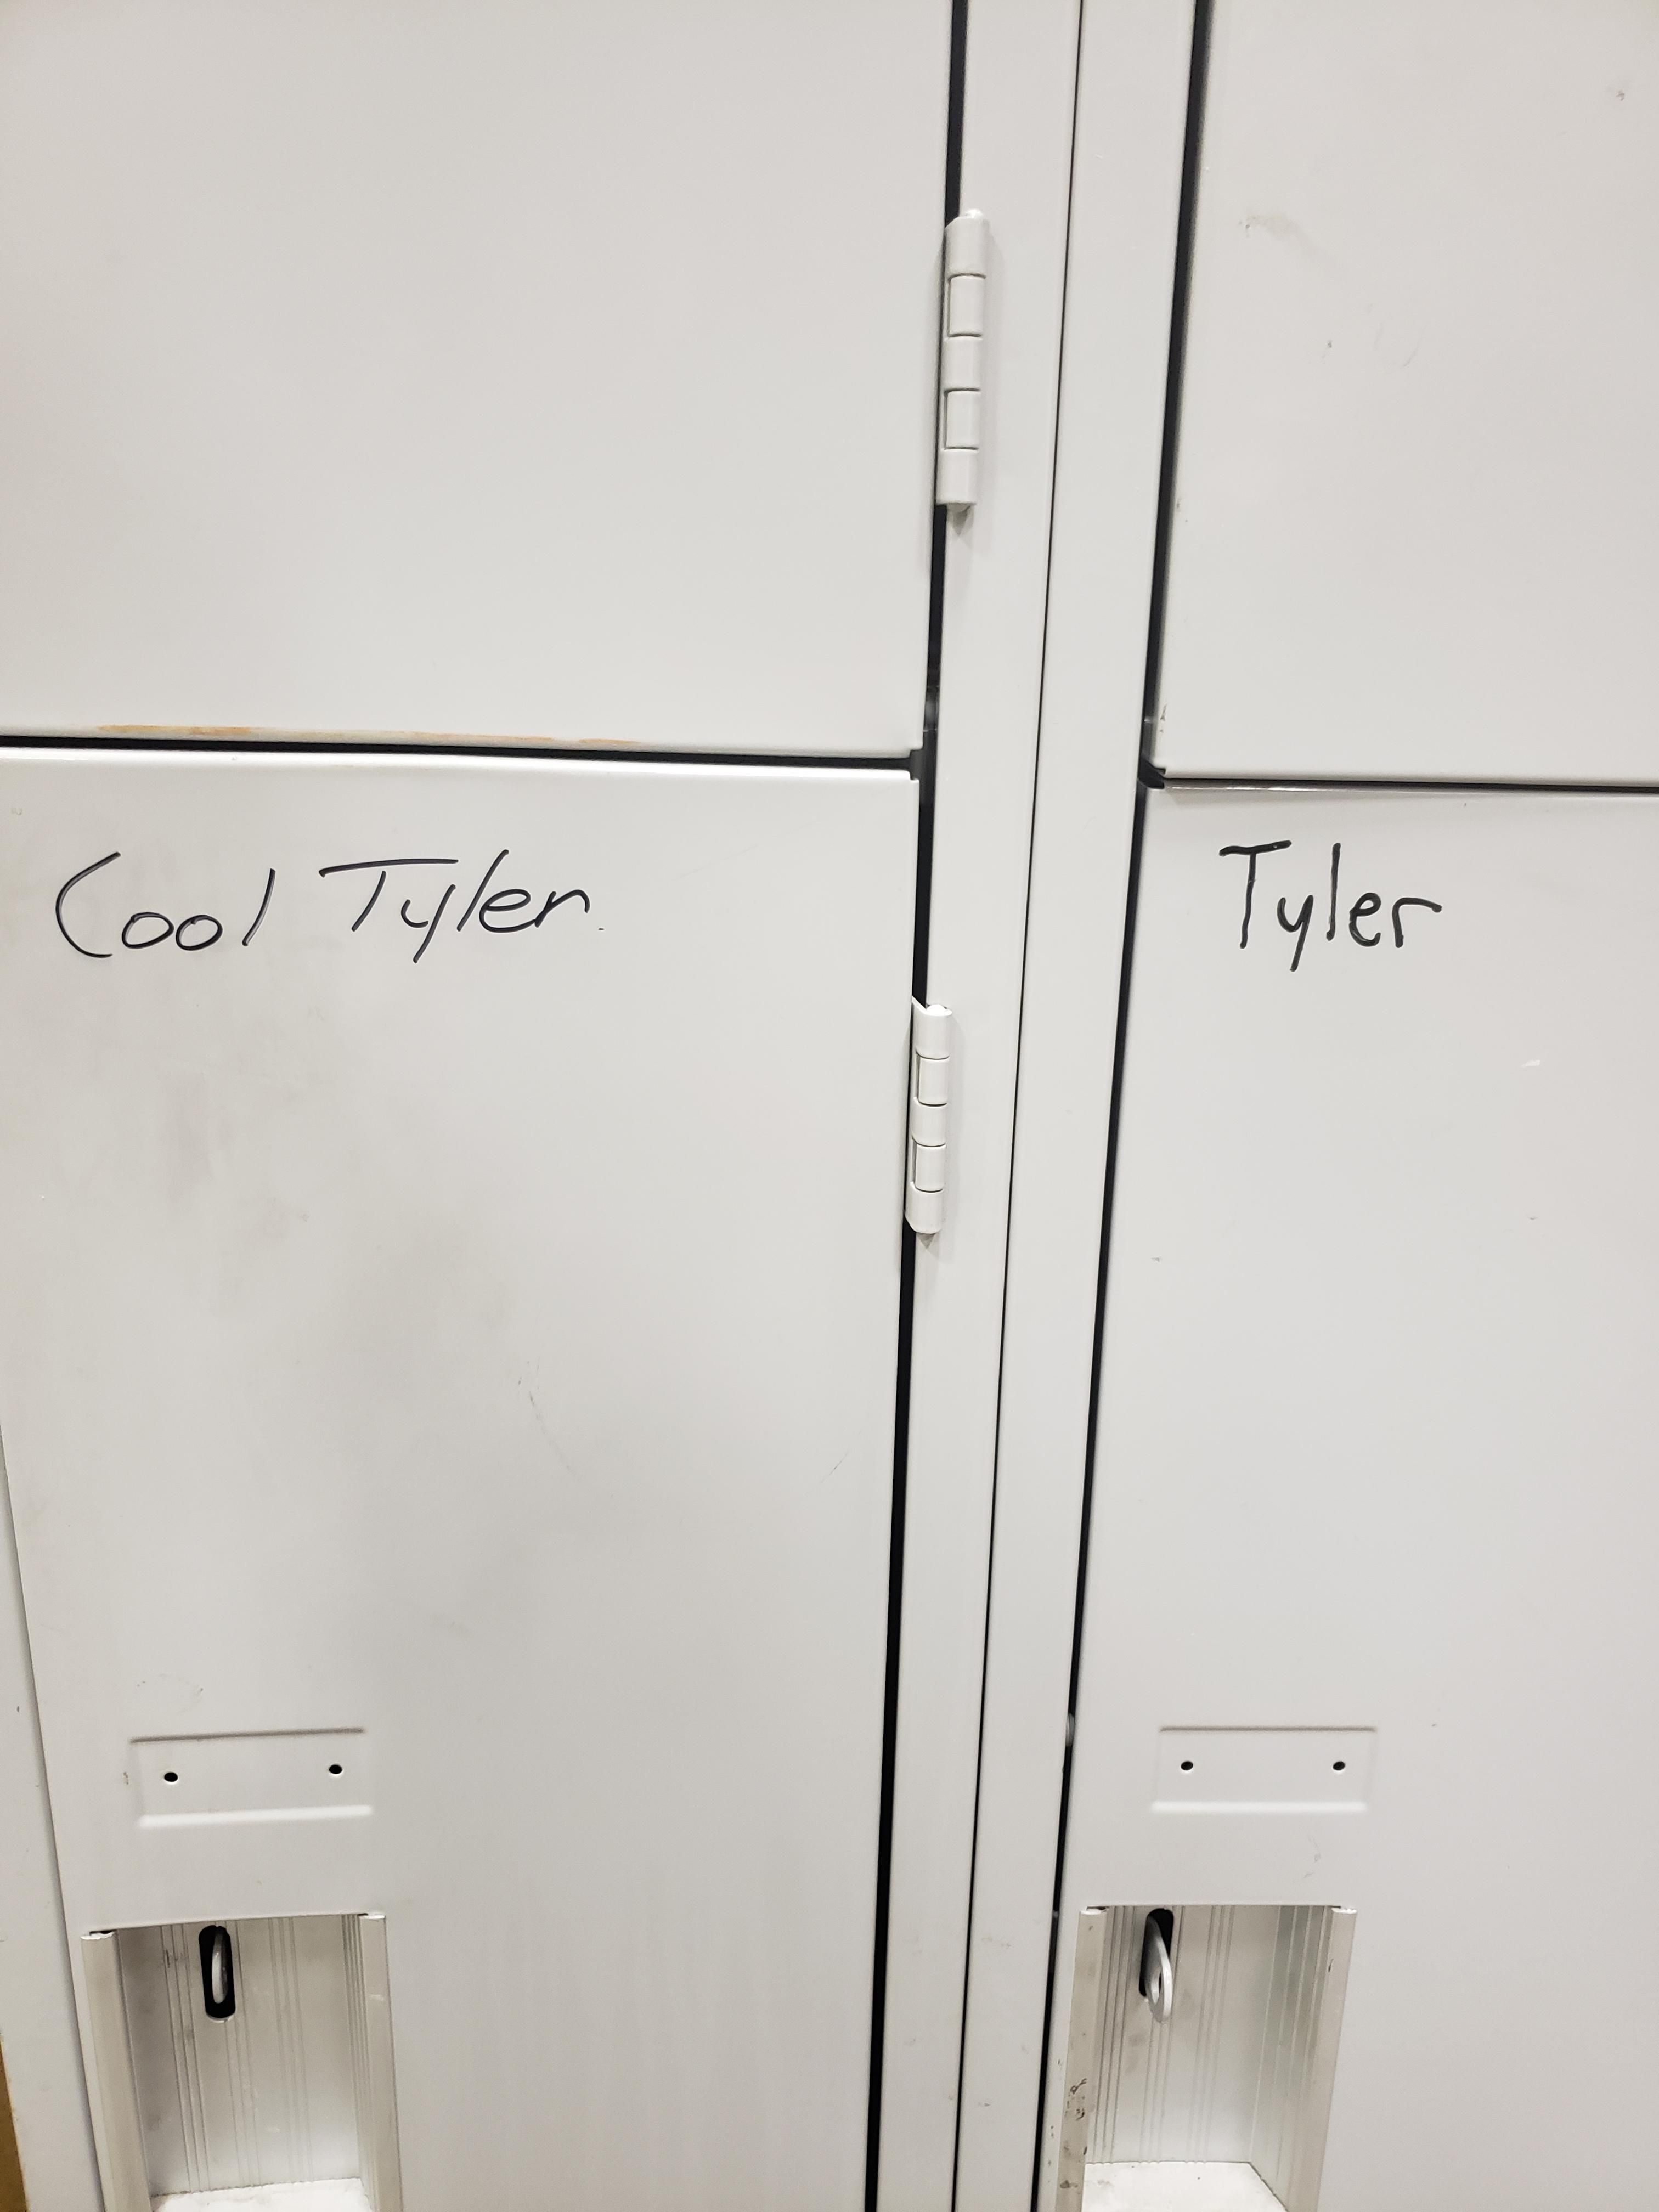 Started a new job recently, and there's another Tyler in my department. Had to differentiate myself.